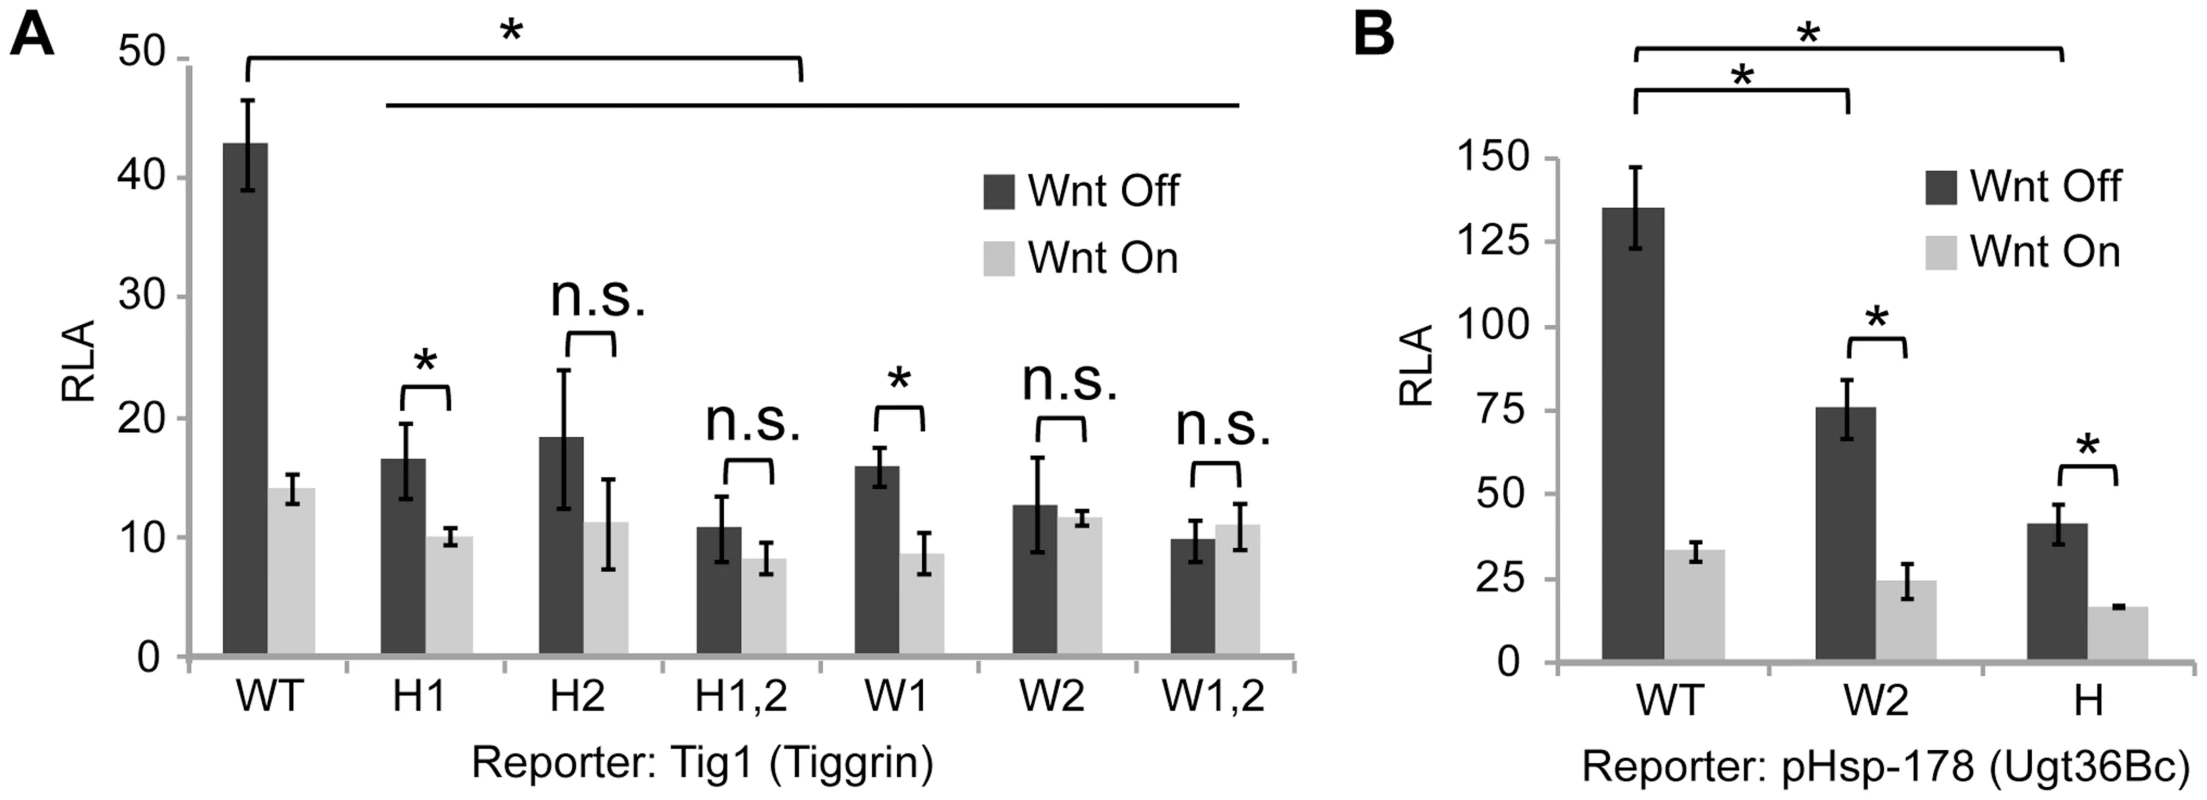 r-Helper and WGAWAW sites are required for Wnt-regulation of <i>Tig</i> and <i>Ugt36Bc</i> W-CRM reporters.